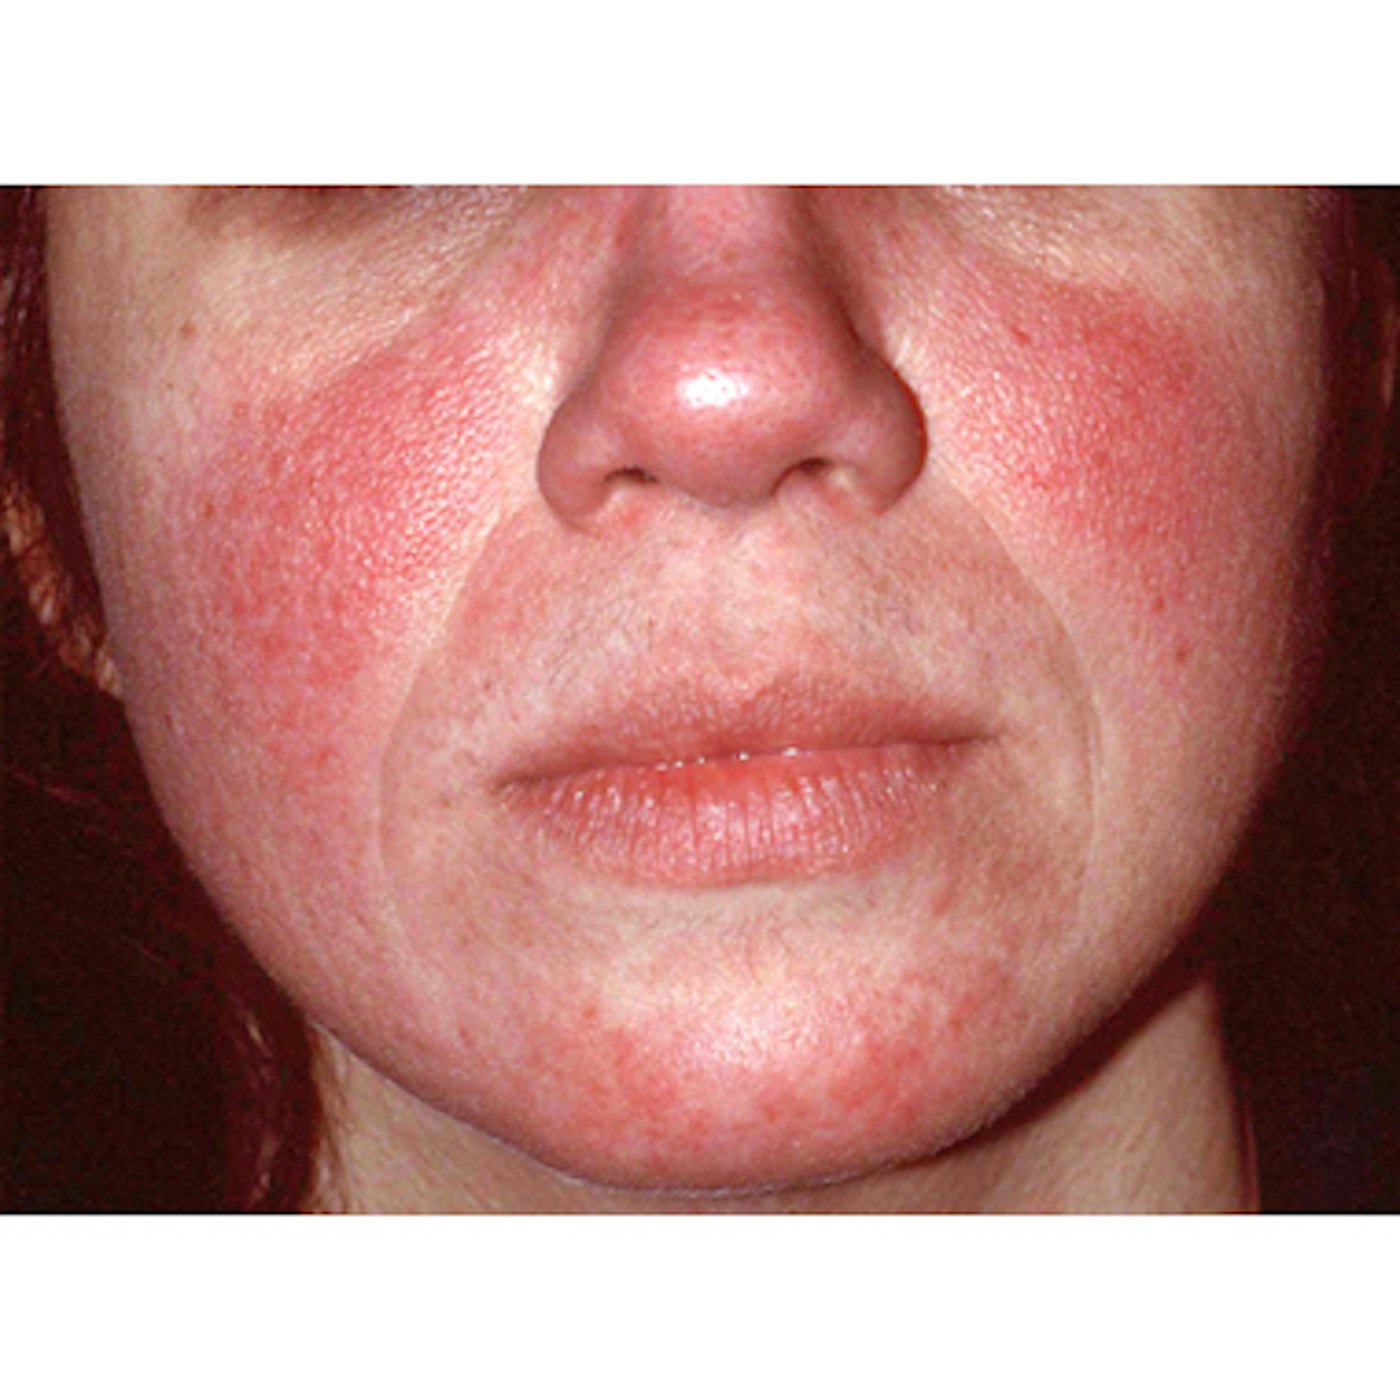 New Standard Classification For Rosacea Published Medesthetics